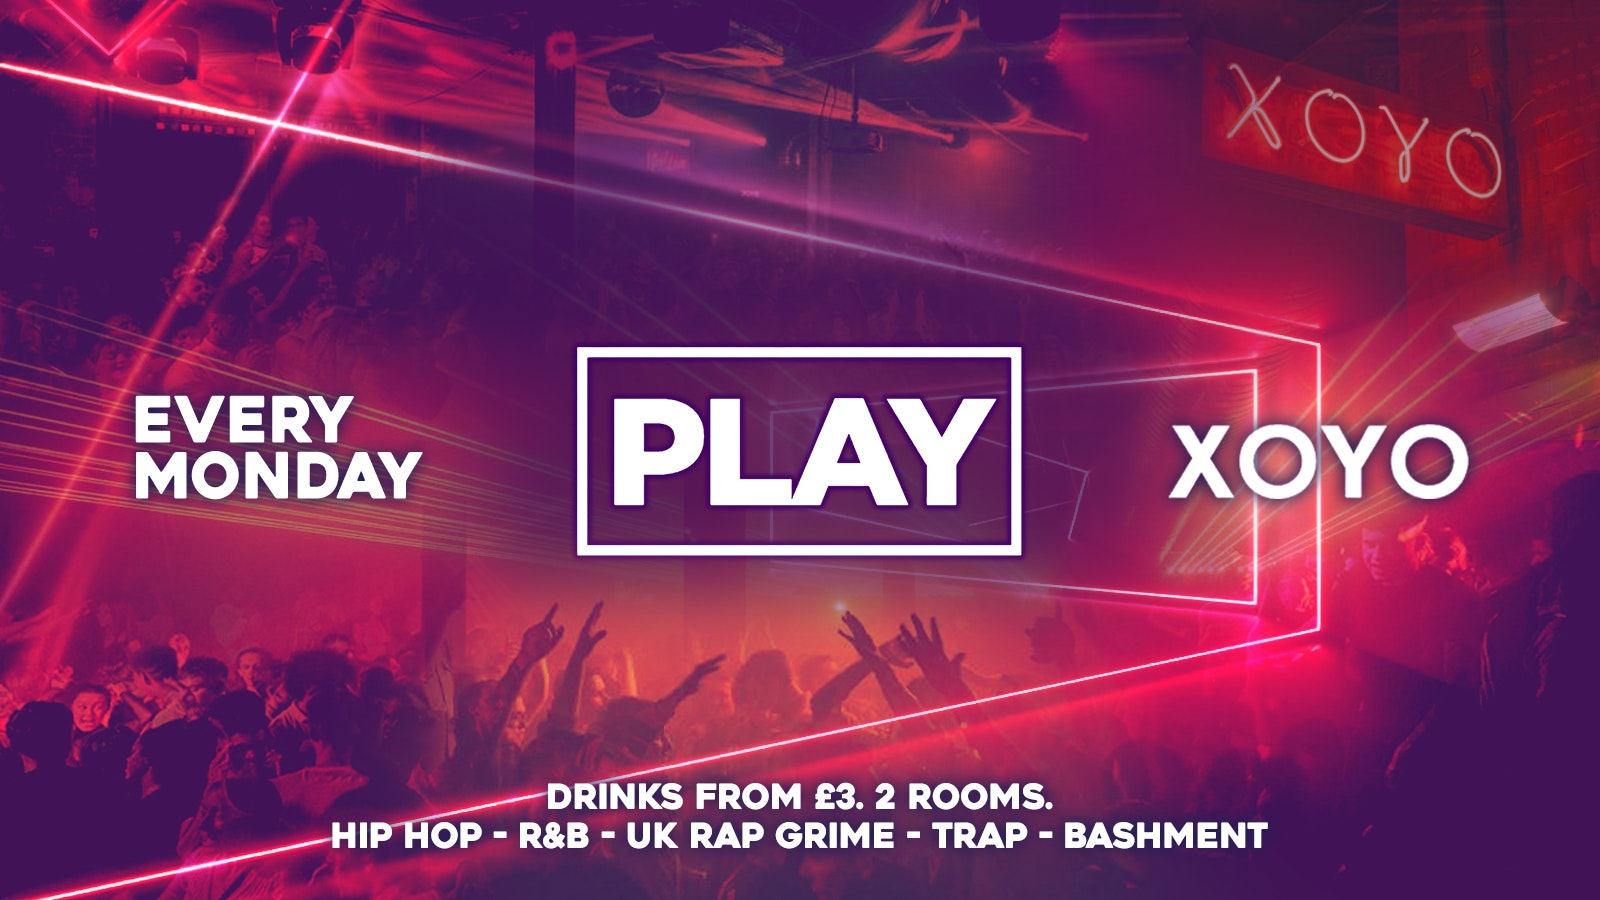 Play @ XOYO – The Biggest Weekly Monday Student Night in London! – 15th August 2022 🔥